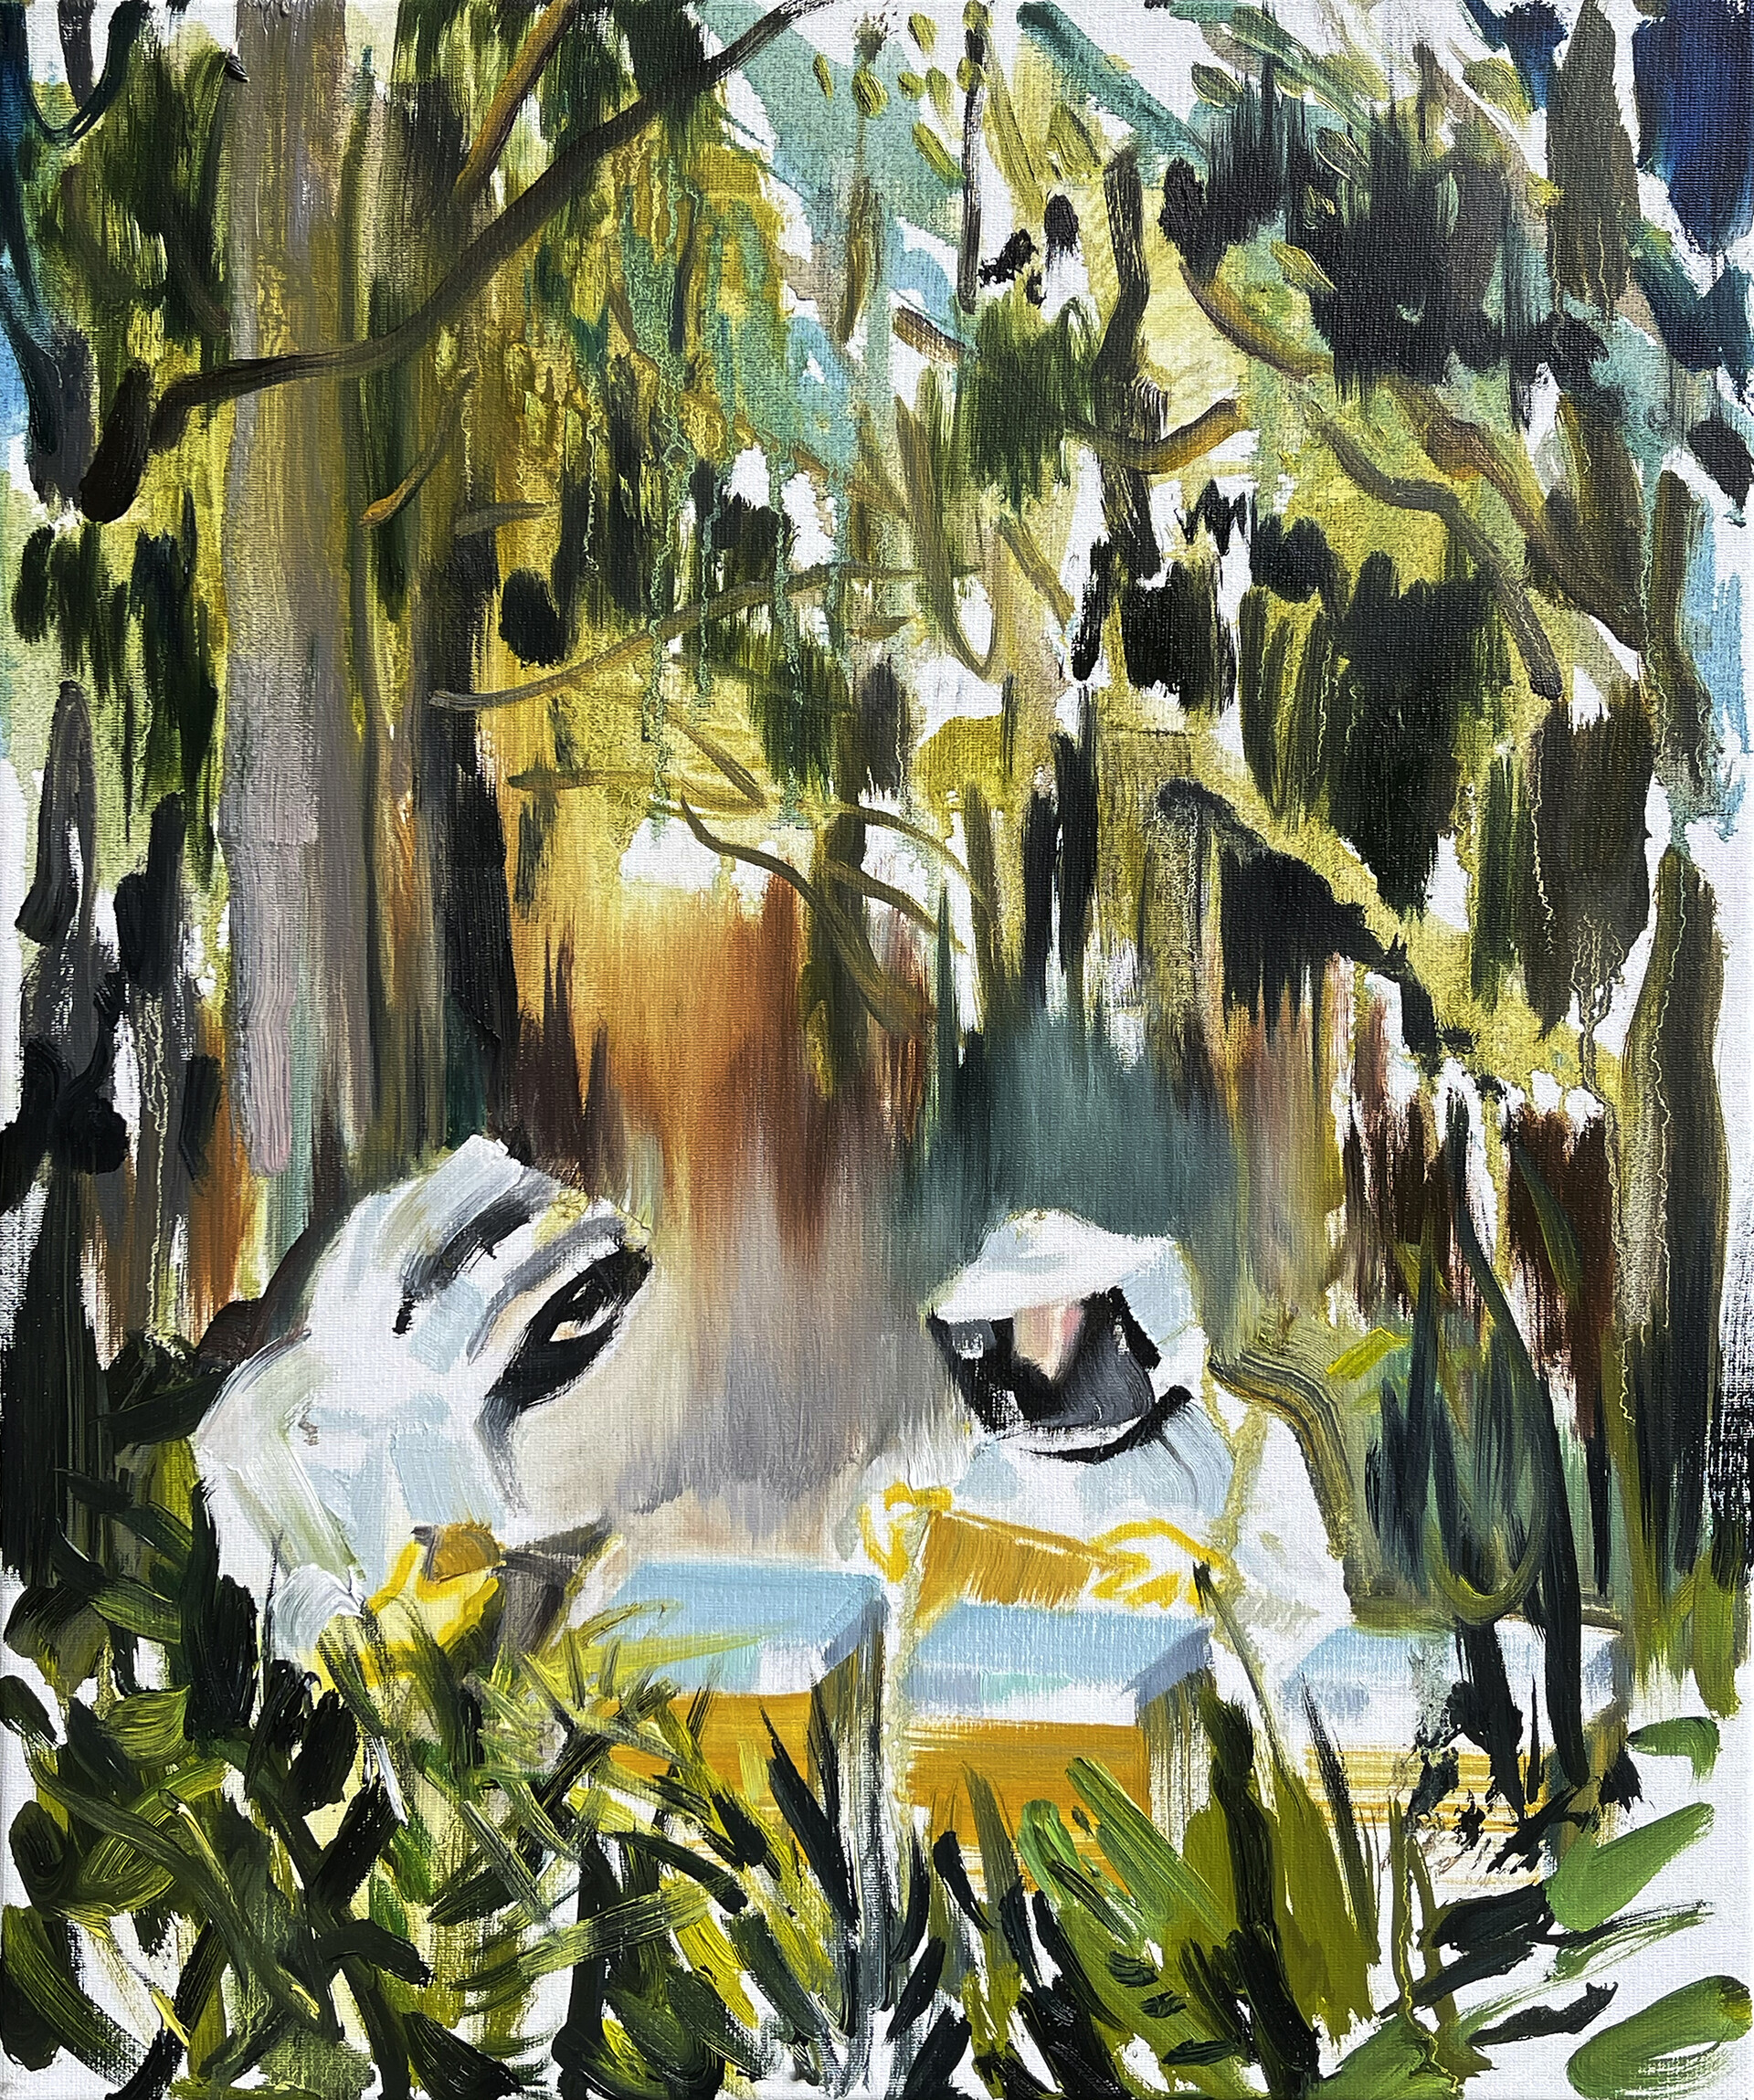 "Beekeepers", oil on canvas, 45,5 x 38 cm,  2022